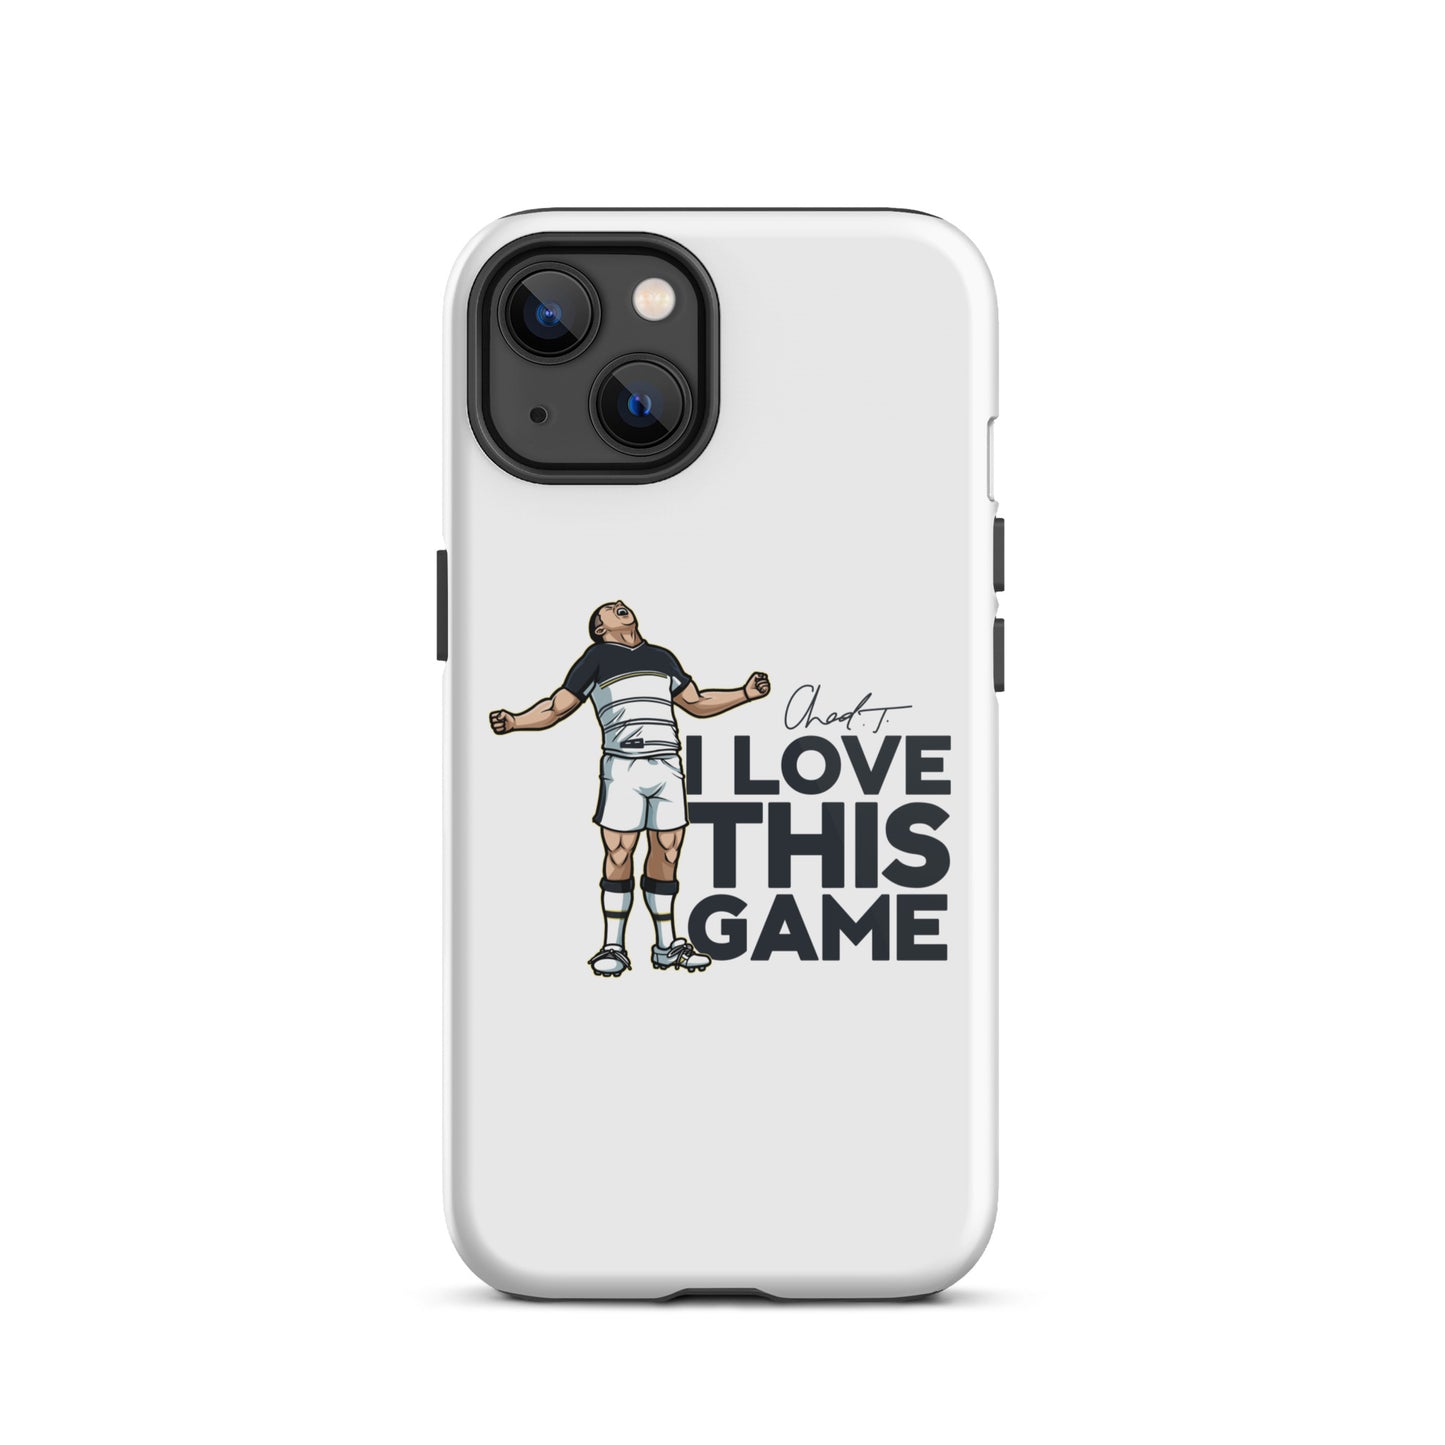 I LOVE THIS GAME iPhone case